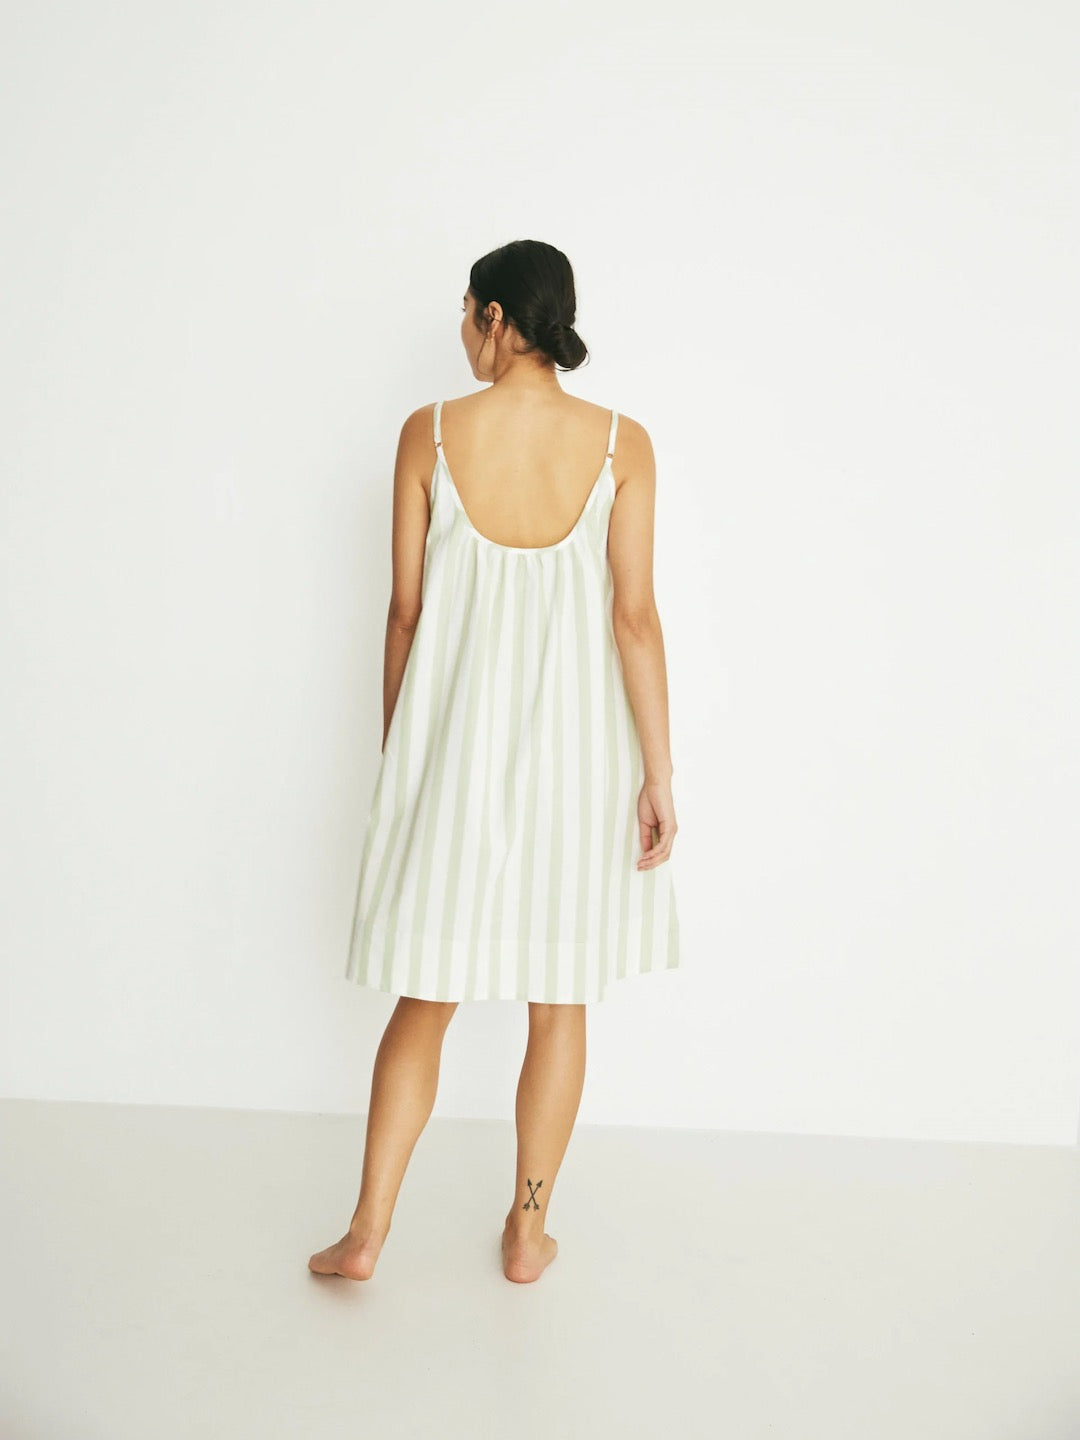 The back view of a woman wearing an Evie Slip - Pear Stripe dress by general sleep.